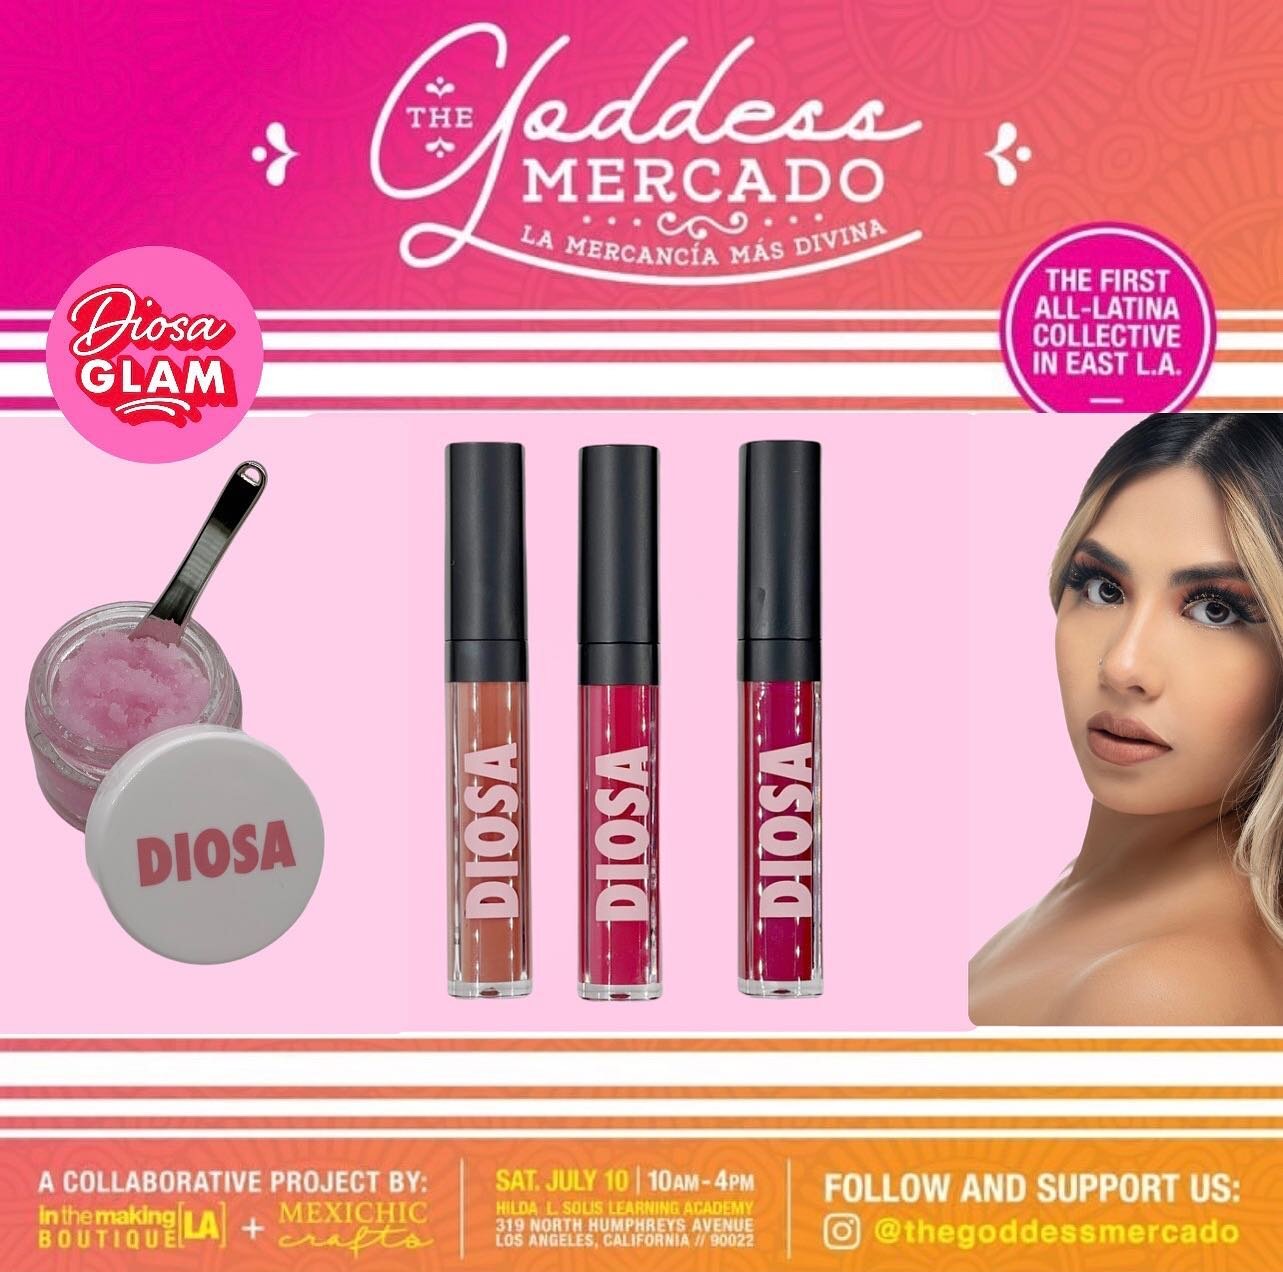 HEY DIOSAS!
WE are back for a HOT Summer🔥Come by for a good time with the DIOSAS of East Los
Sat. June 10th @thegoddessmercado 
10am-4pm 
@ Hilda Solis Learning Academy 
319 N. Humphreys 90022

Come say Hi!💋